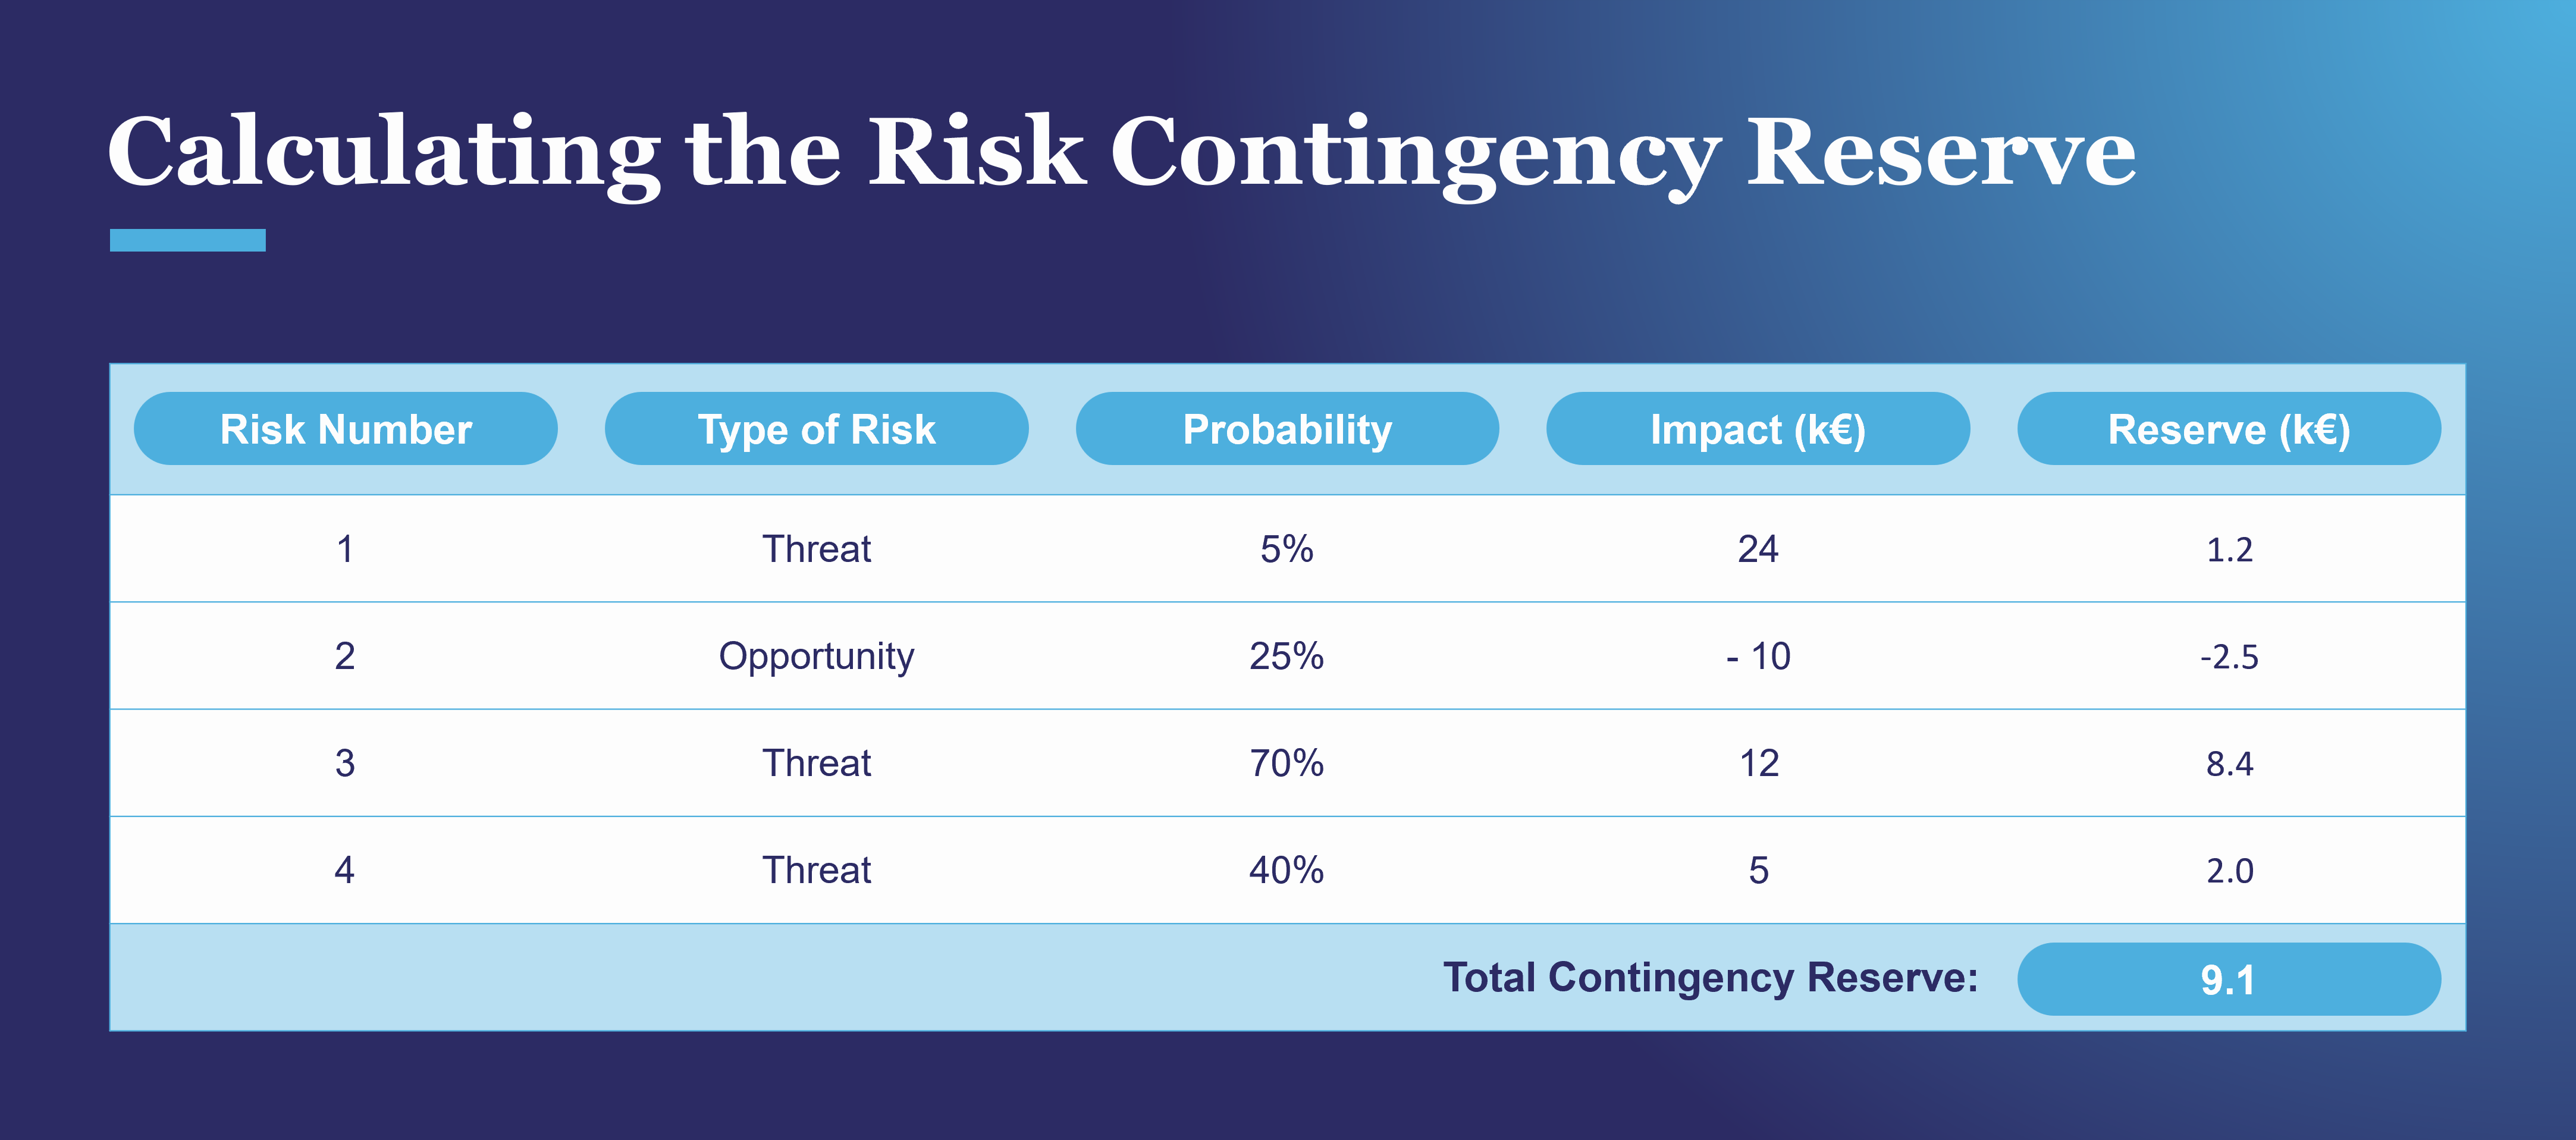 Applying the deterministic method for calculating the risk contingency reserve